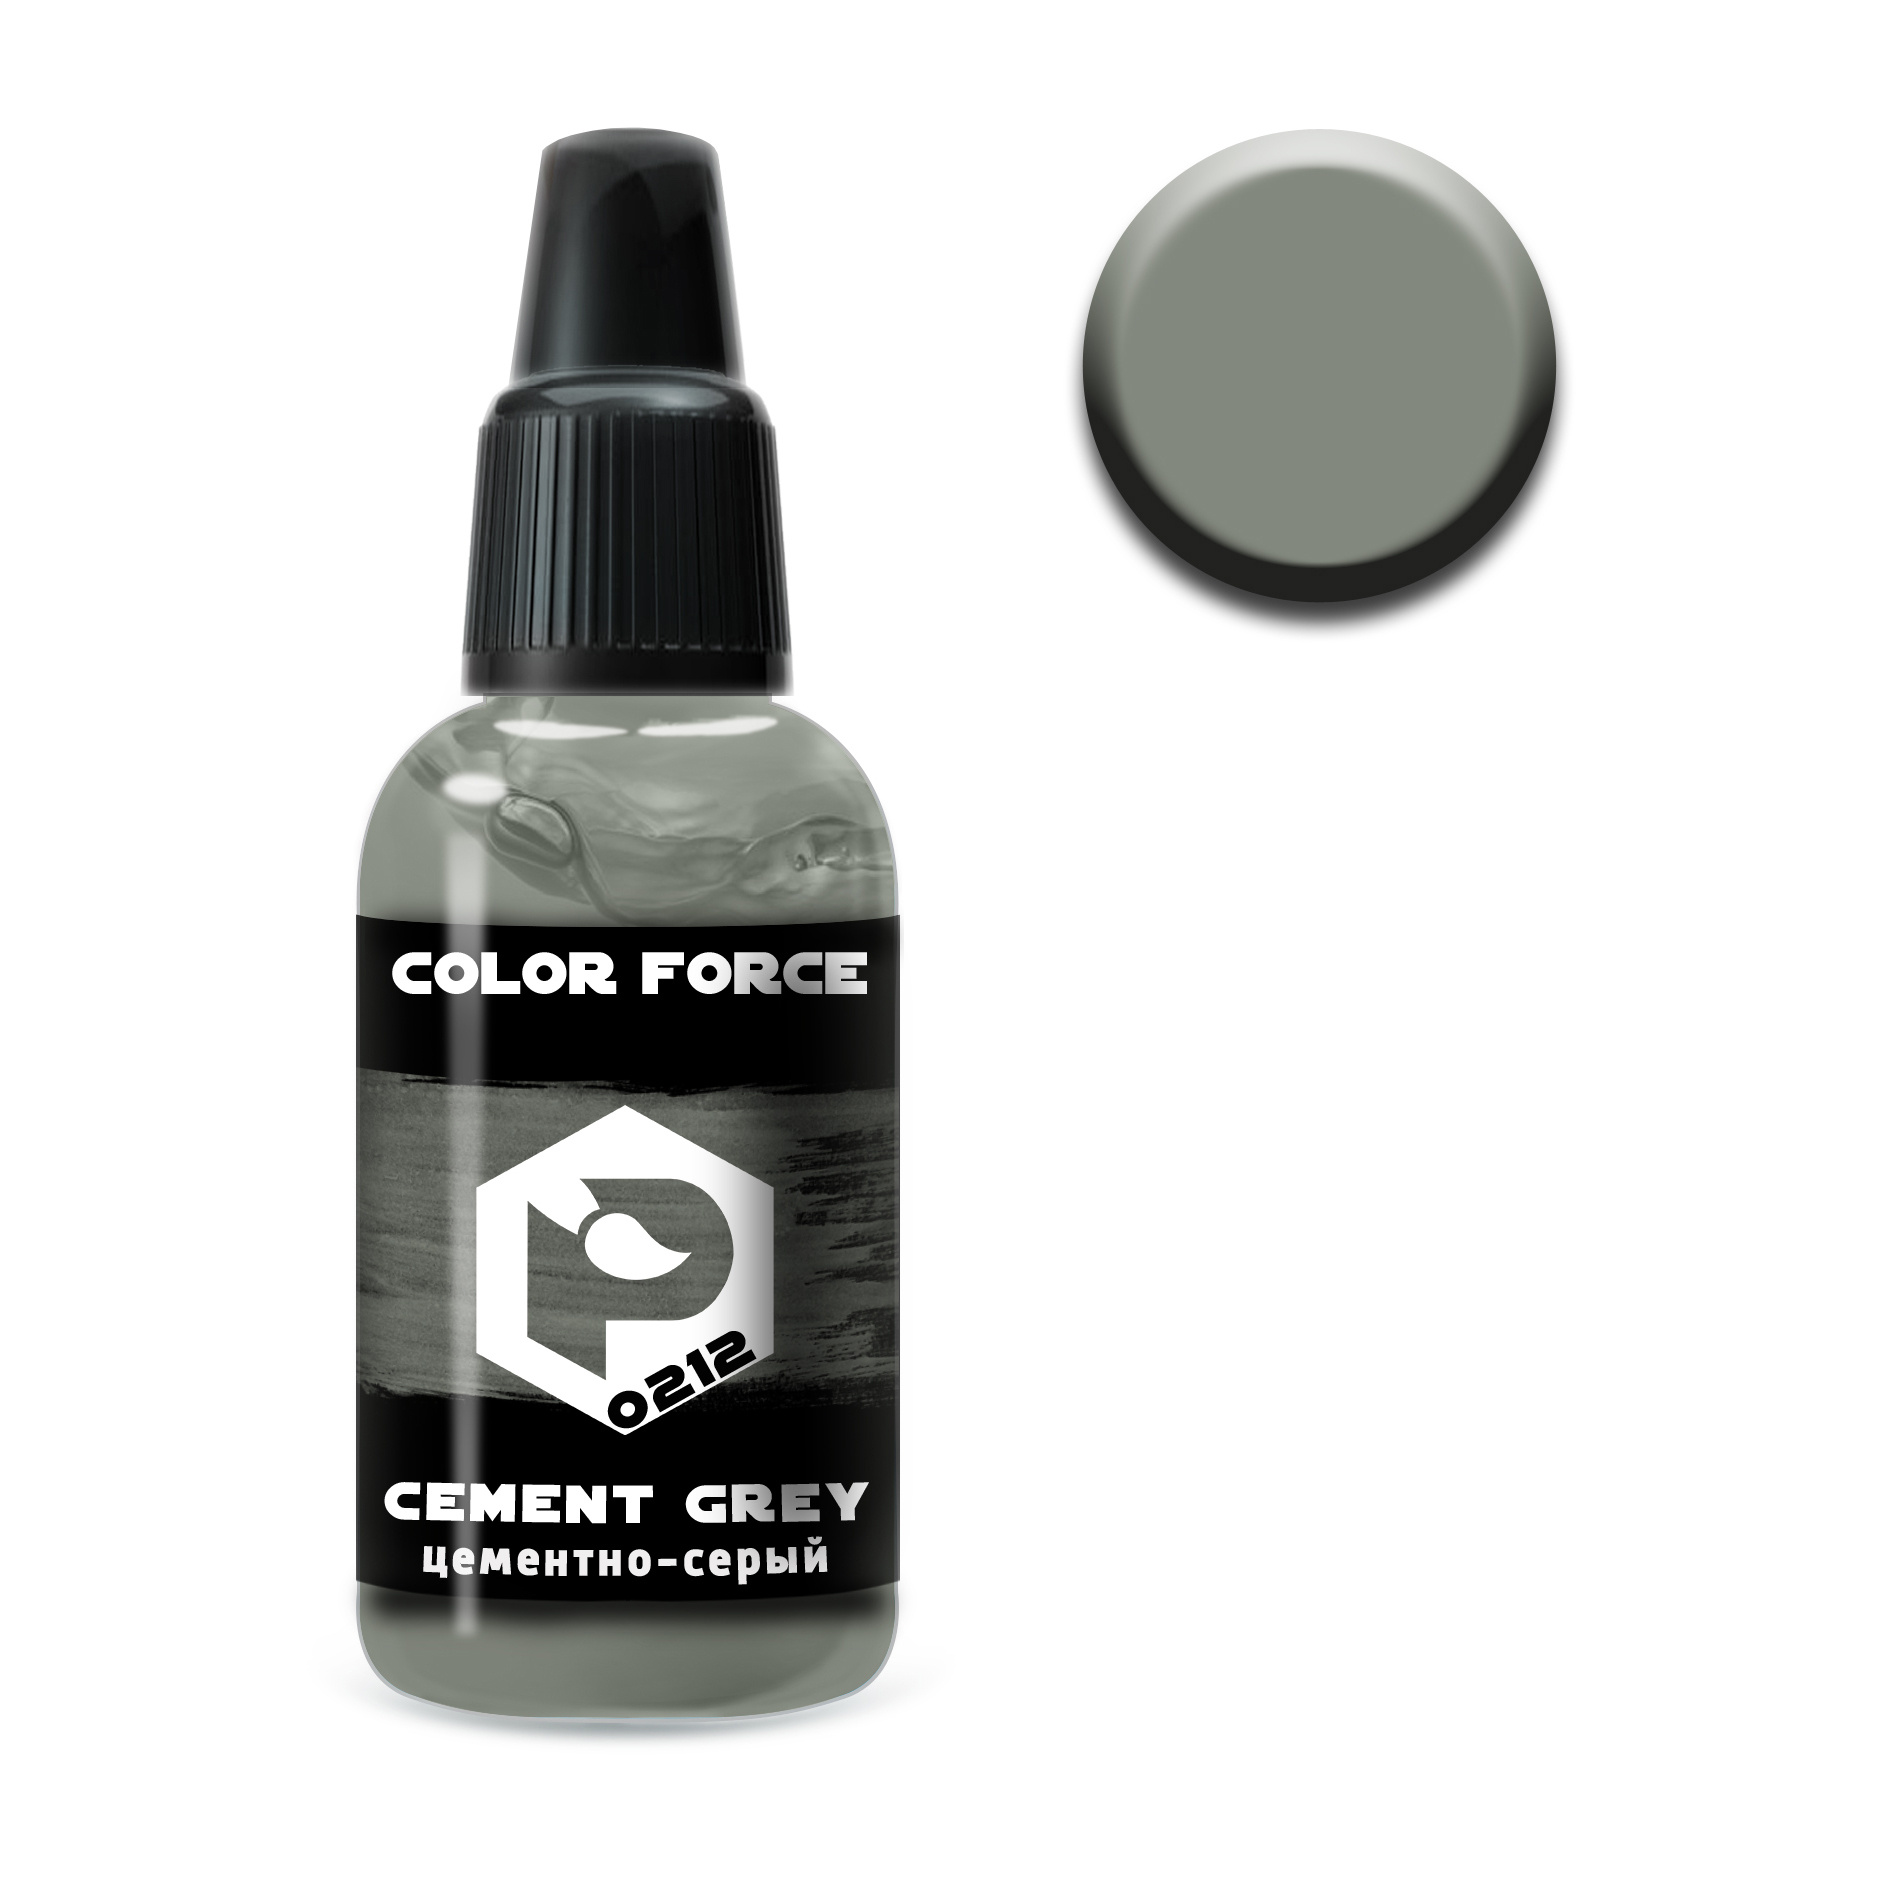 art.0212 Pacific88 airbrush Paint Cement grey (Cement grey)